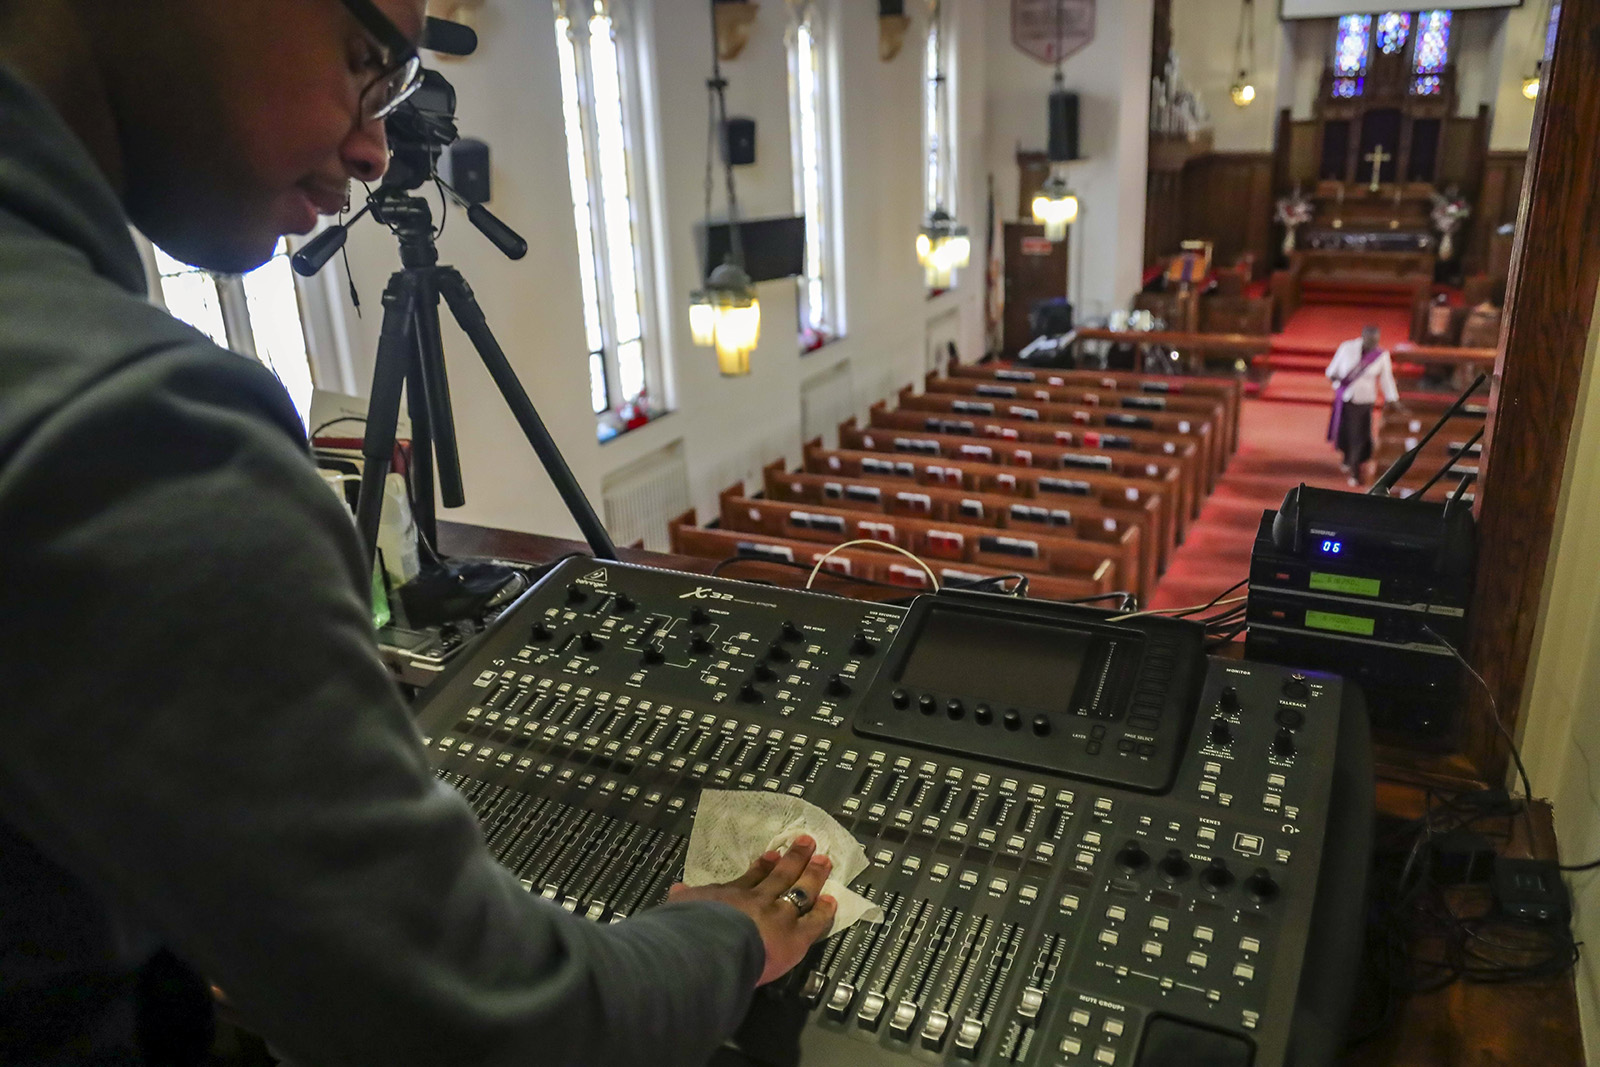 Multimedia technician Joseph Stoute, 21, uses a disinfectant wipe to clean the audio equipment at St. Paul's Methodist Church in Brooklyn, N.Y., where he directed a livestream online broadcast for home-bound congregants due to city-wide restrictions aimed at controlling the COVID-19 outbreak, Sunday March 22, 2020, in New York. (AP Photo/Bebeto Matthews)